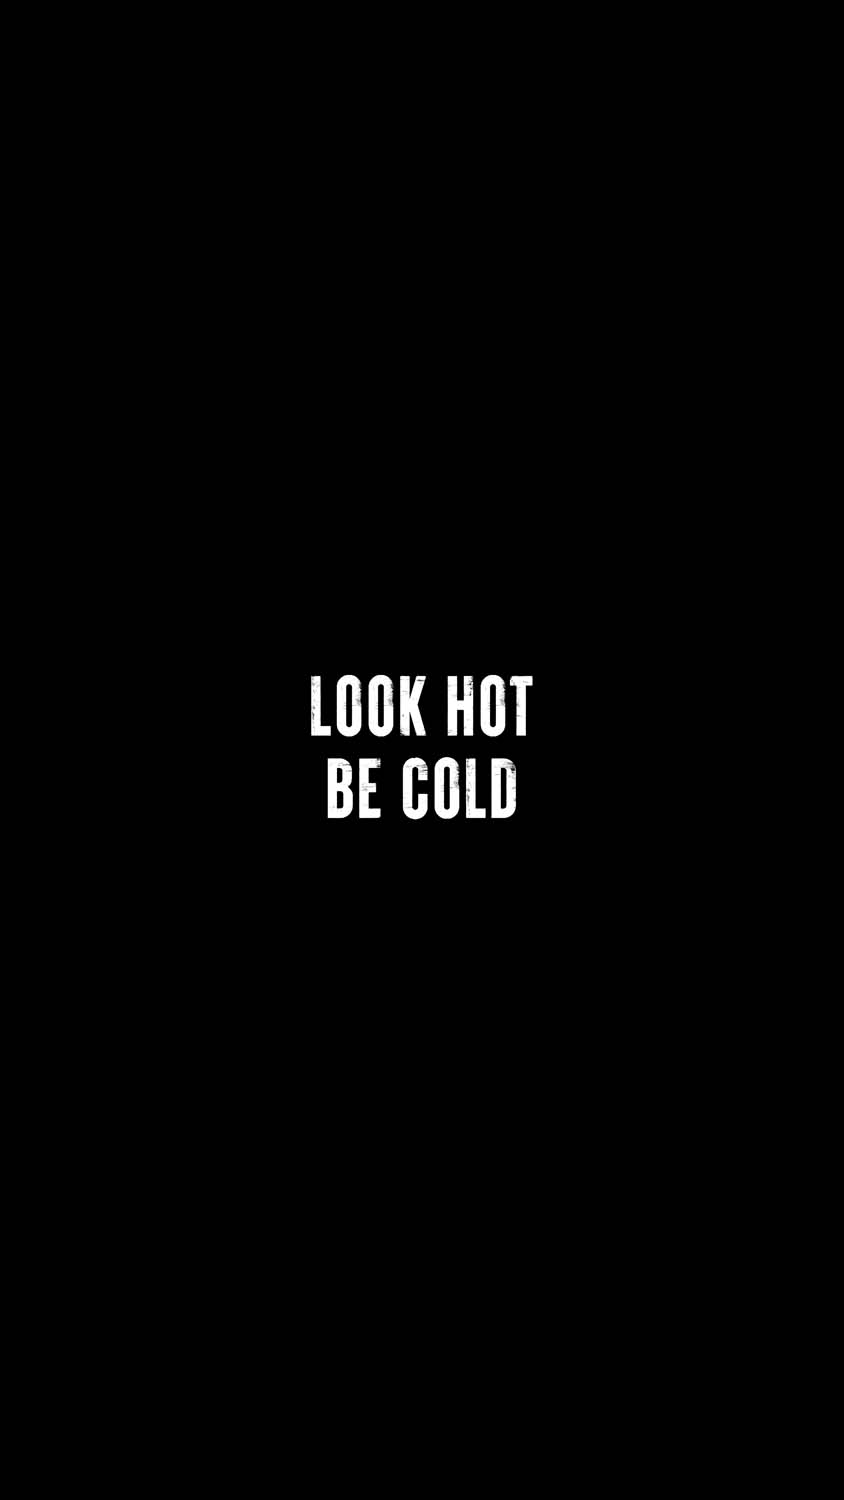 Look Hot Be Cold iPhone Wallpaper HD